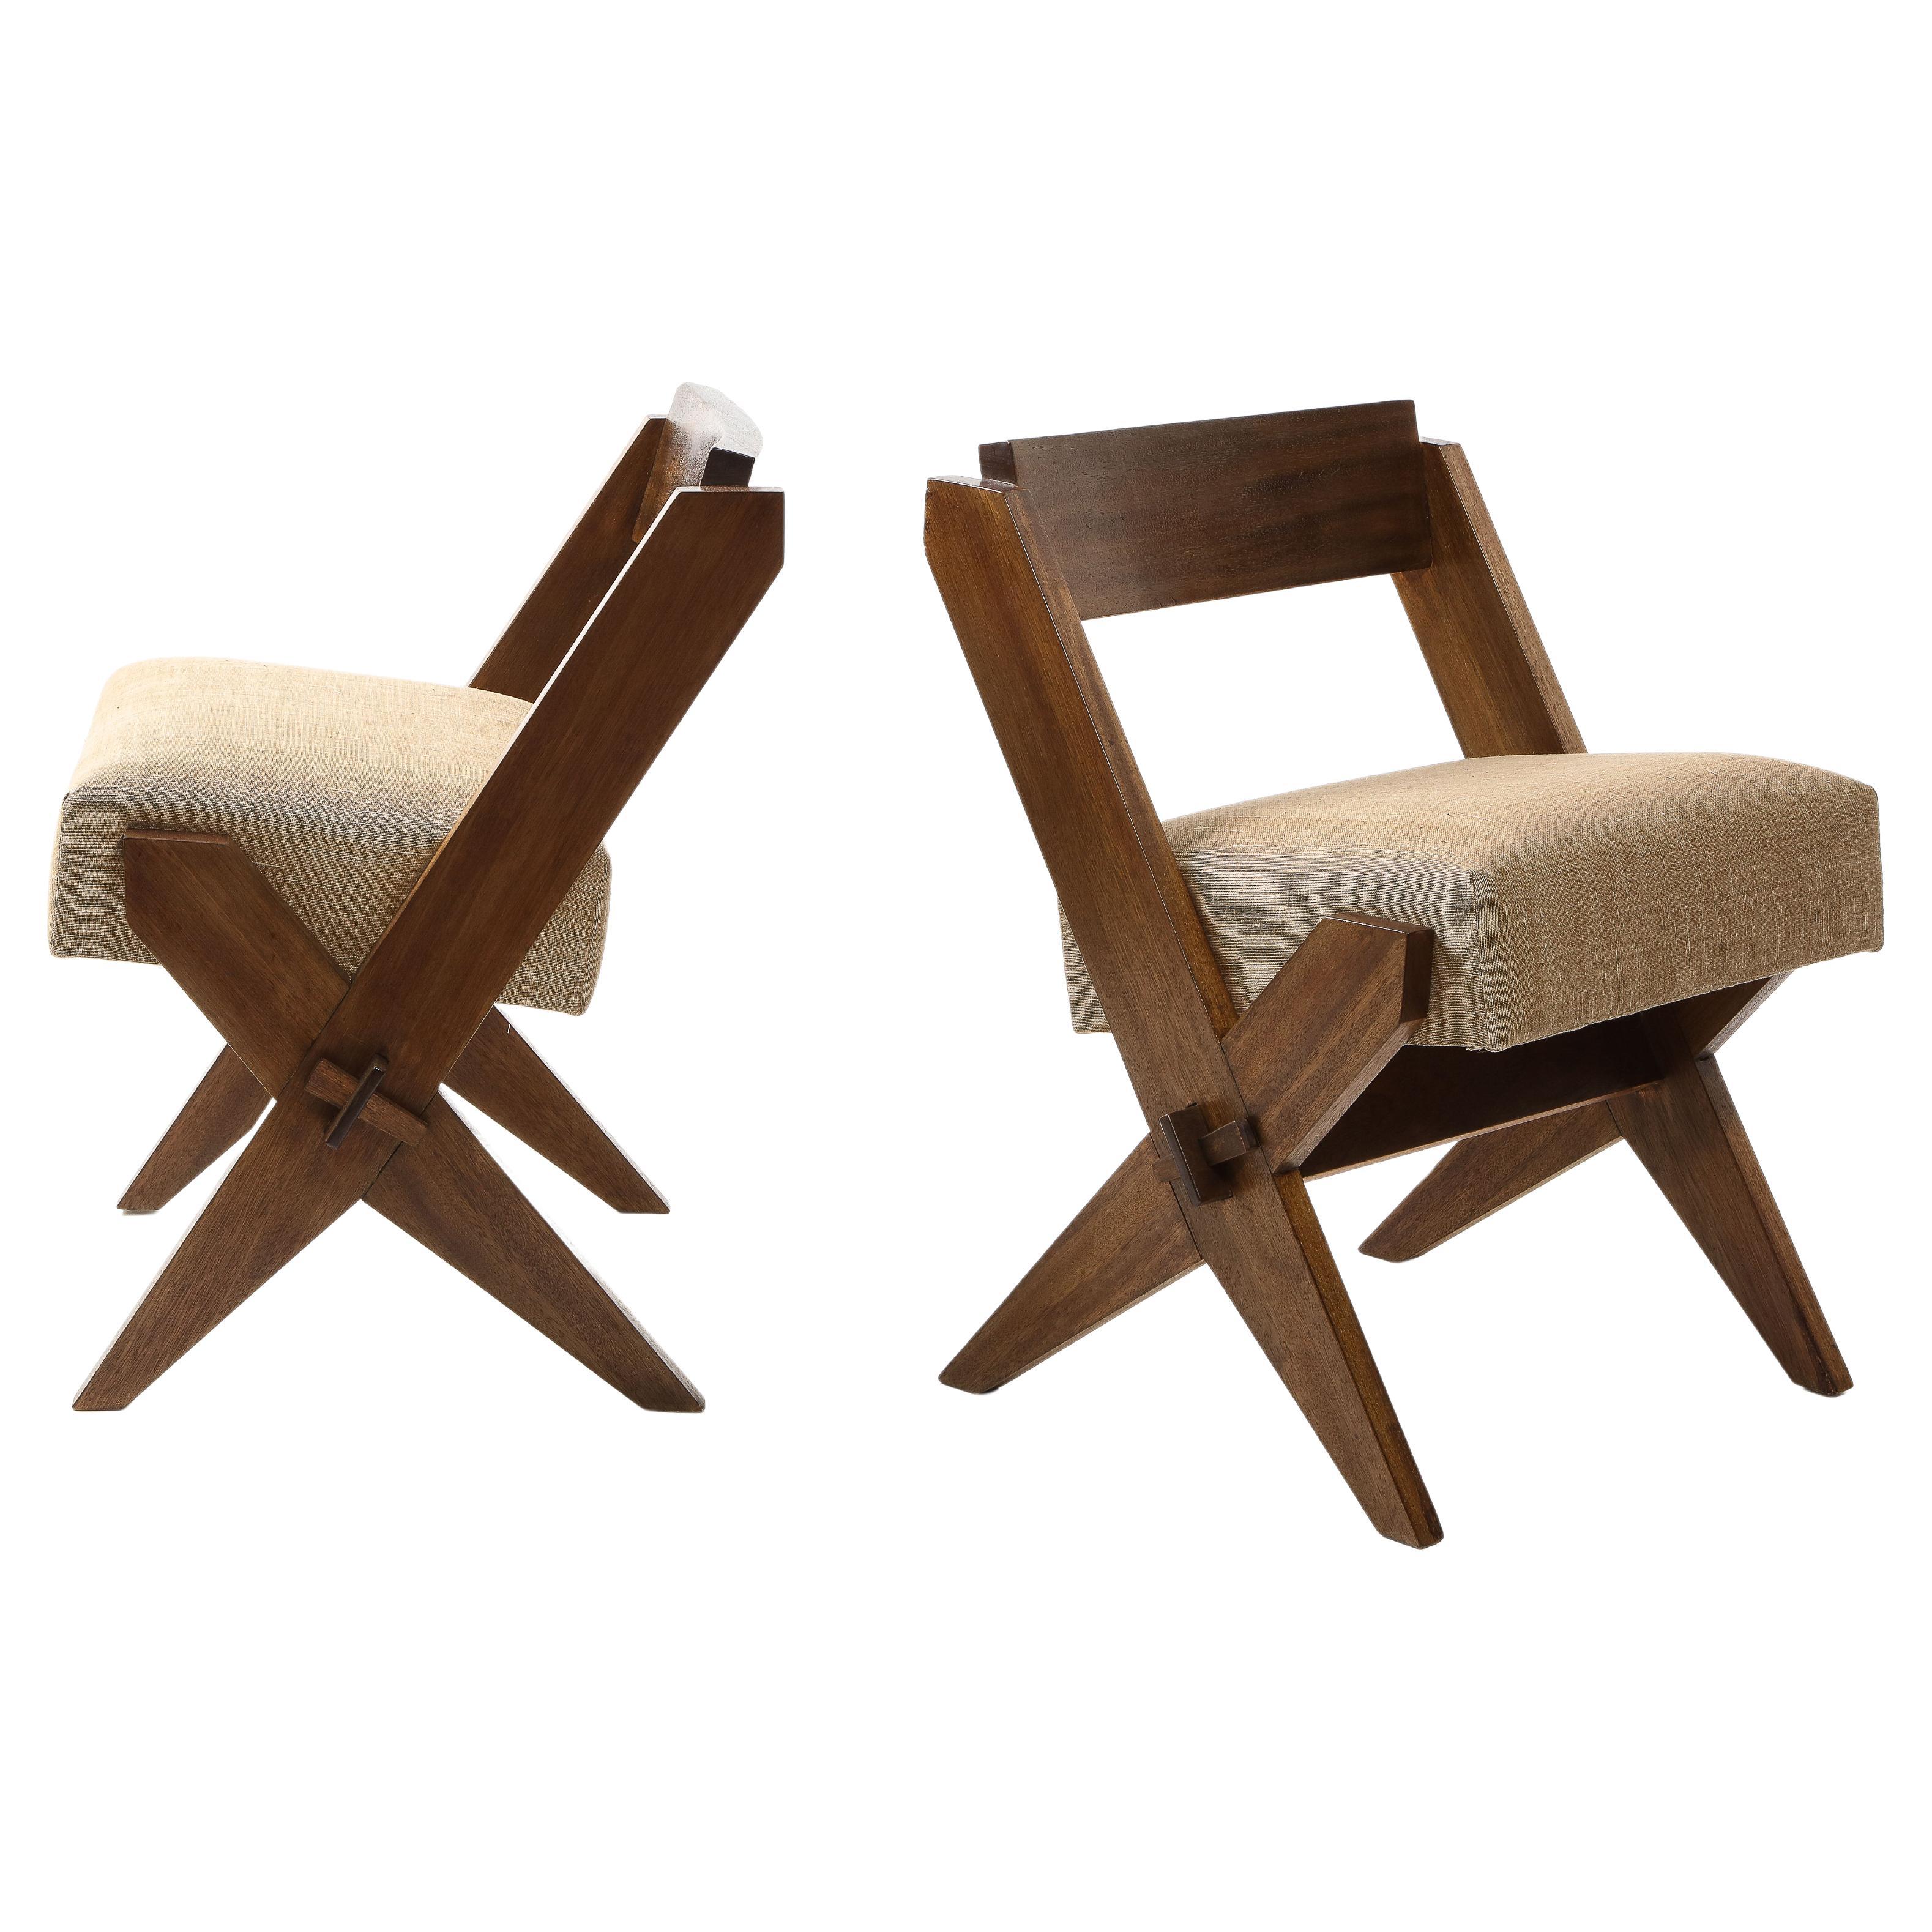 Pair of Reconstruction Small Solid Wood Scissor Leg Chairs, France 1950's